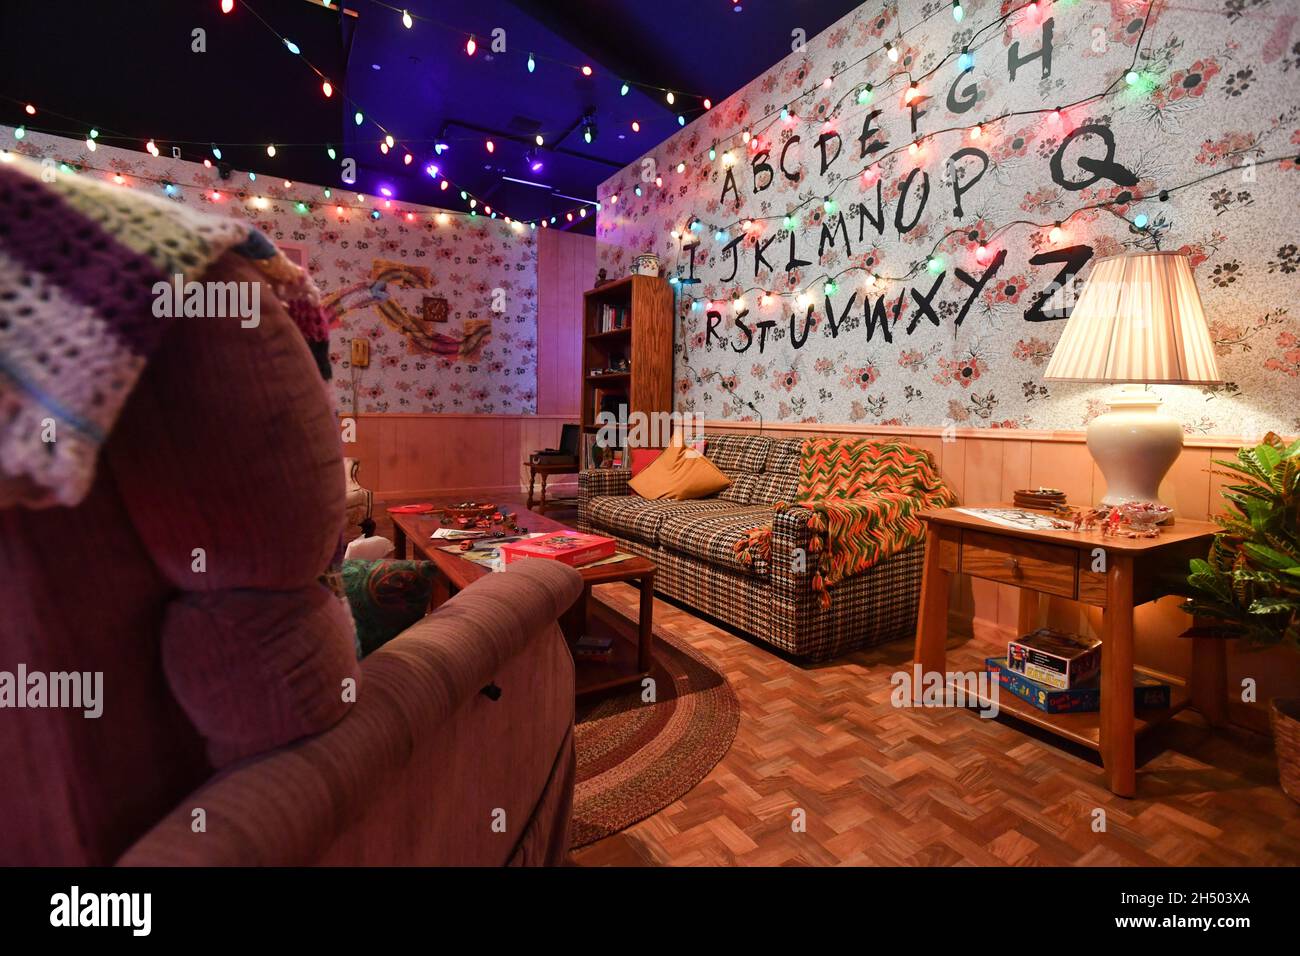 A view of the Stranger Things pop-up store presented by Netflix located in  Time Square in New York. The pop-up store showcases recreated sets, install  Stock Photo - Alamy